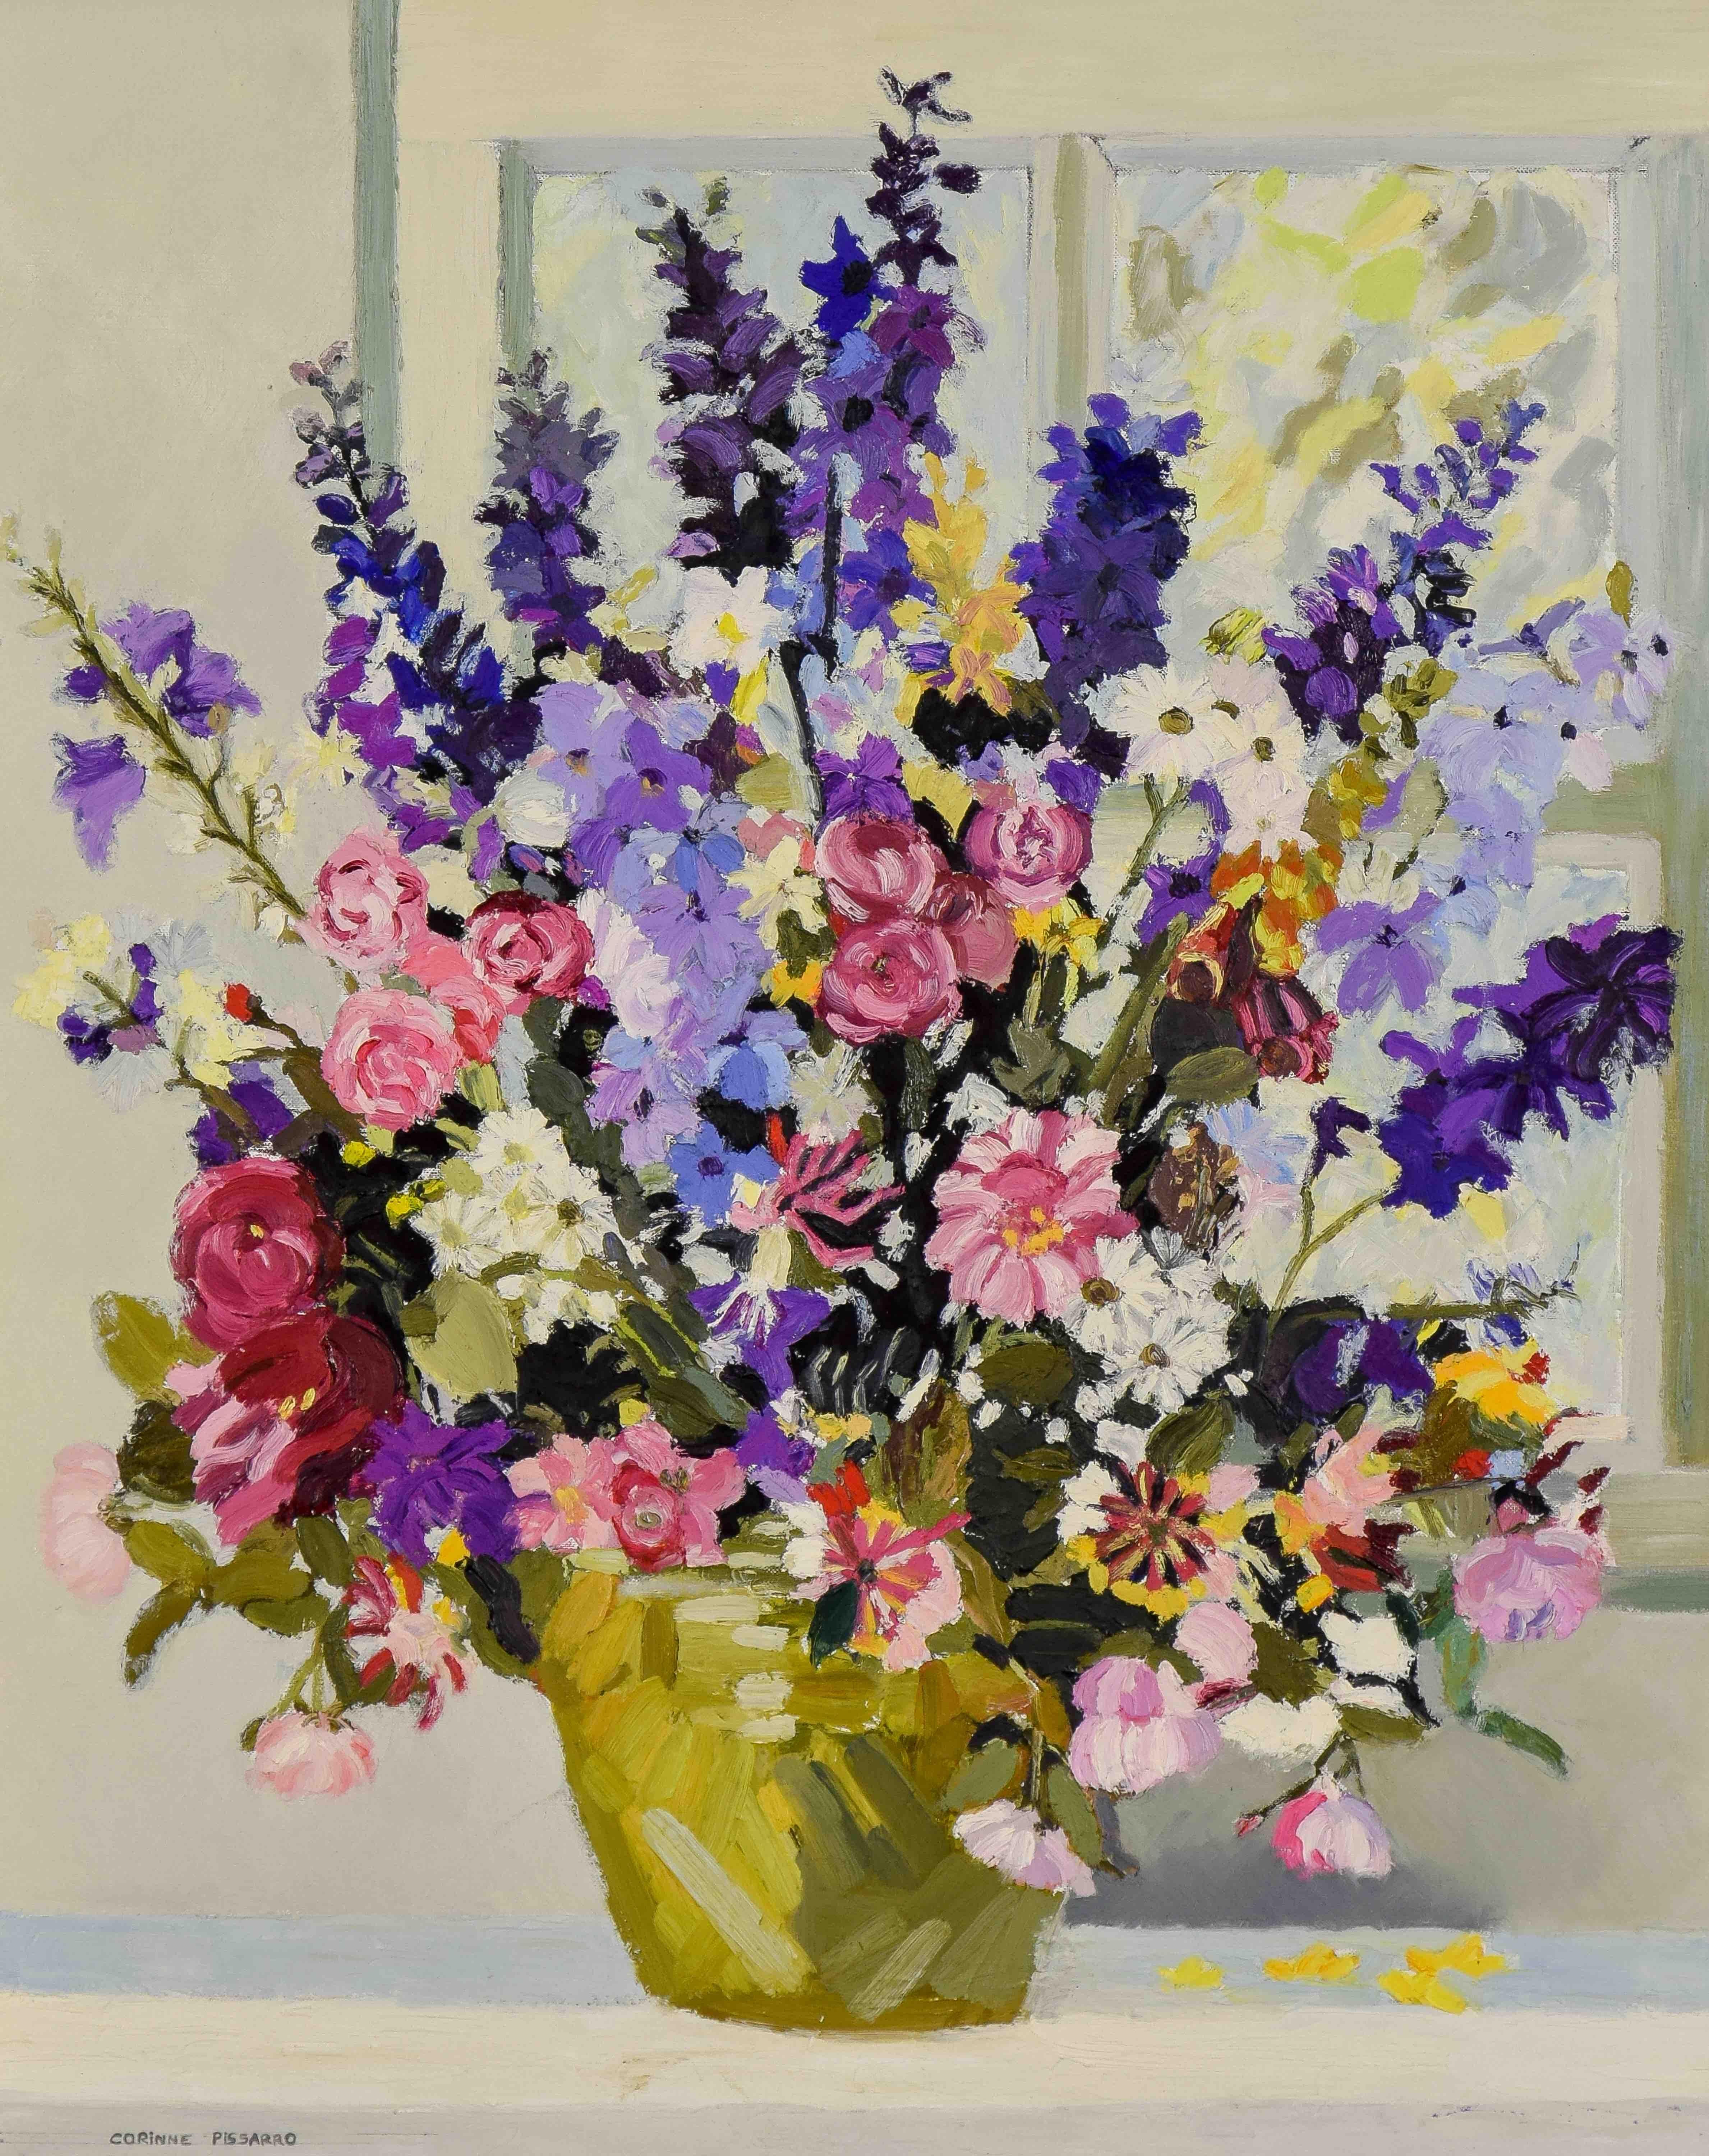 Les Delphiniums de Mamy by Corinne Pissarro (b. 1974)
Oil on canvas
81 x 65 cm (31 ⁷/₈ x 25 ⁵/₈ inches)
Signed lower left Corinne Pissarro Signed again, titled and dated Nov-Dec 2001 Irlande on the reverse

This work is accompanied by a certificate